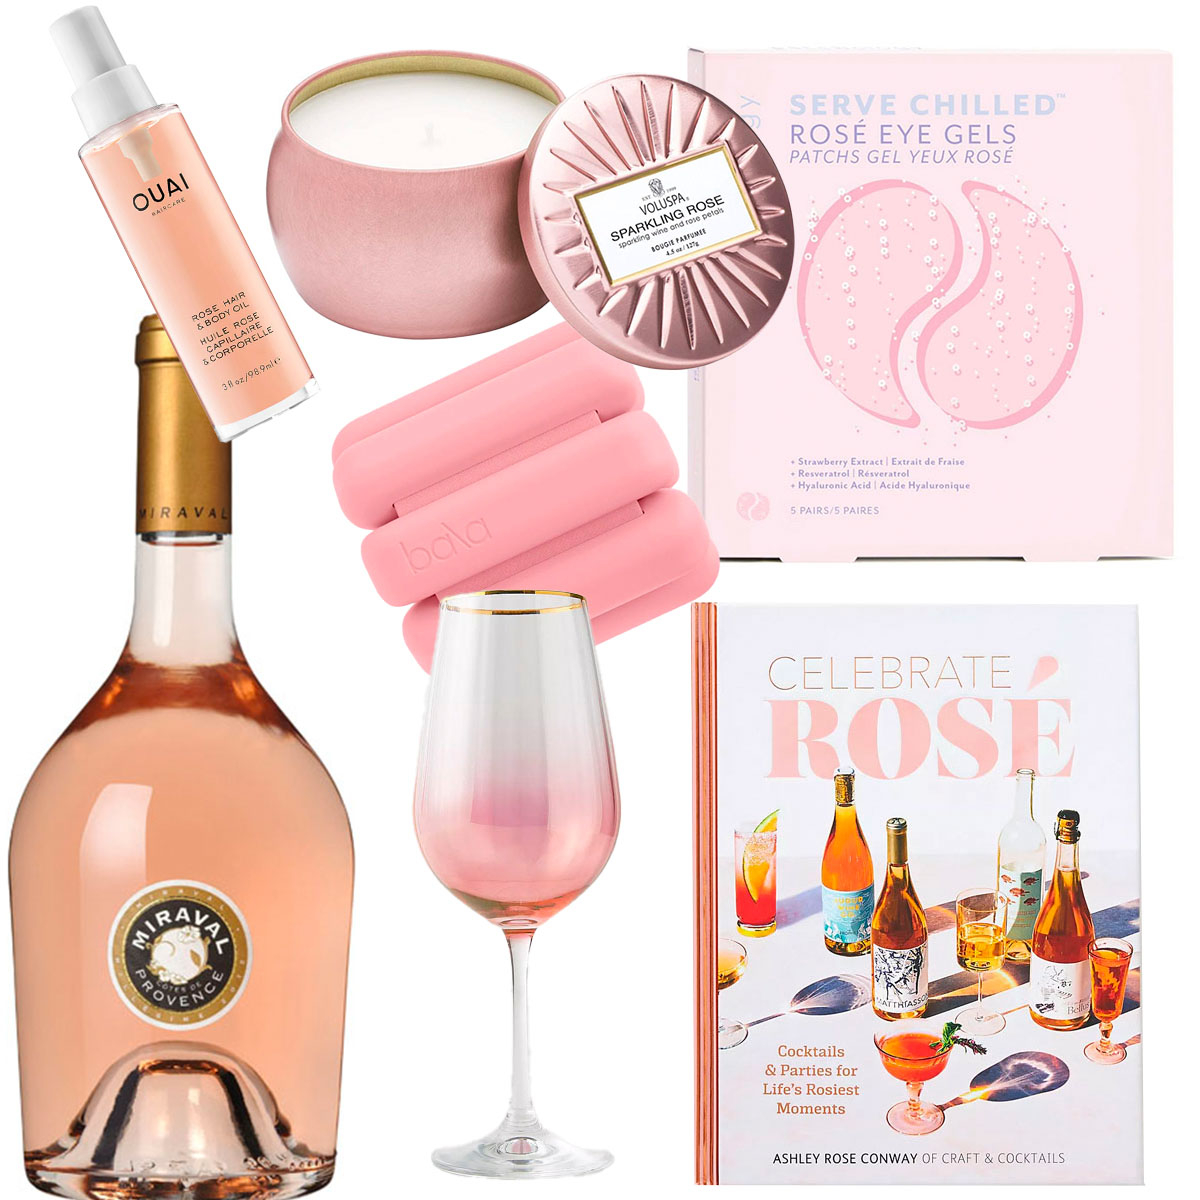 21 Rosé Wines and Products to Indulge in This Summer